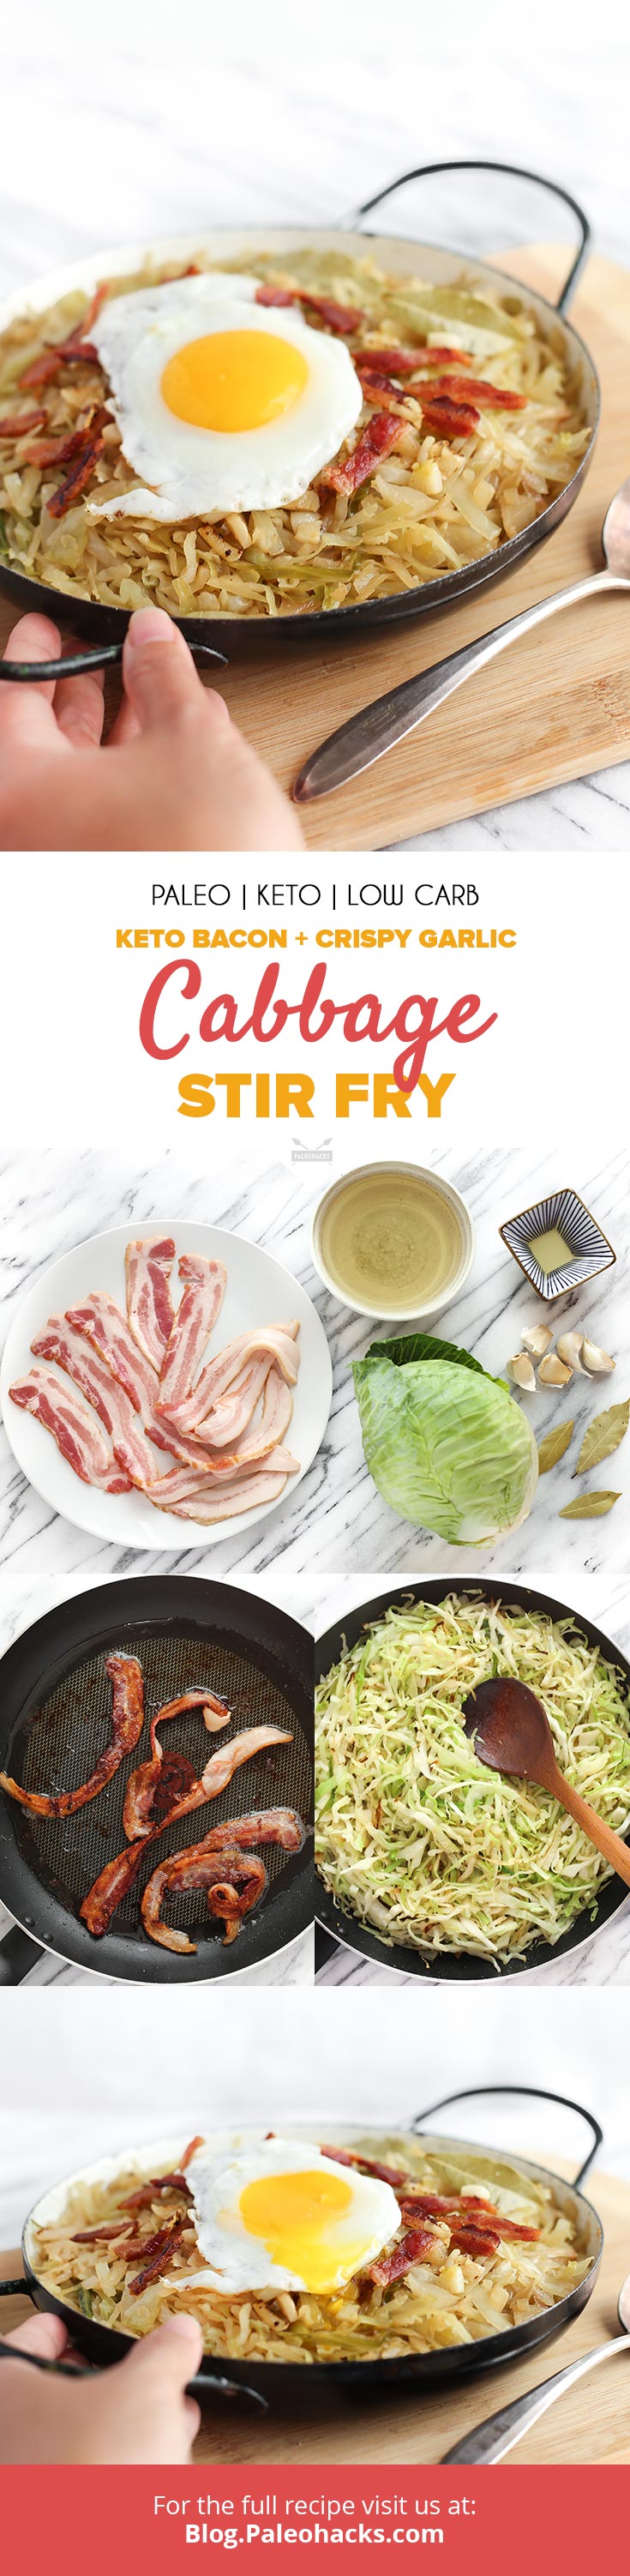 Stir-fry Crispy Bacon and Garlic Cabbage for a keto recipe worth making again and again. BRB, currently swooning over this recipe!